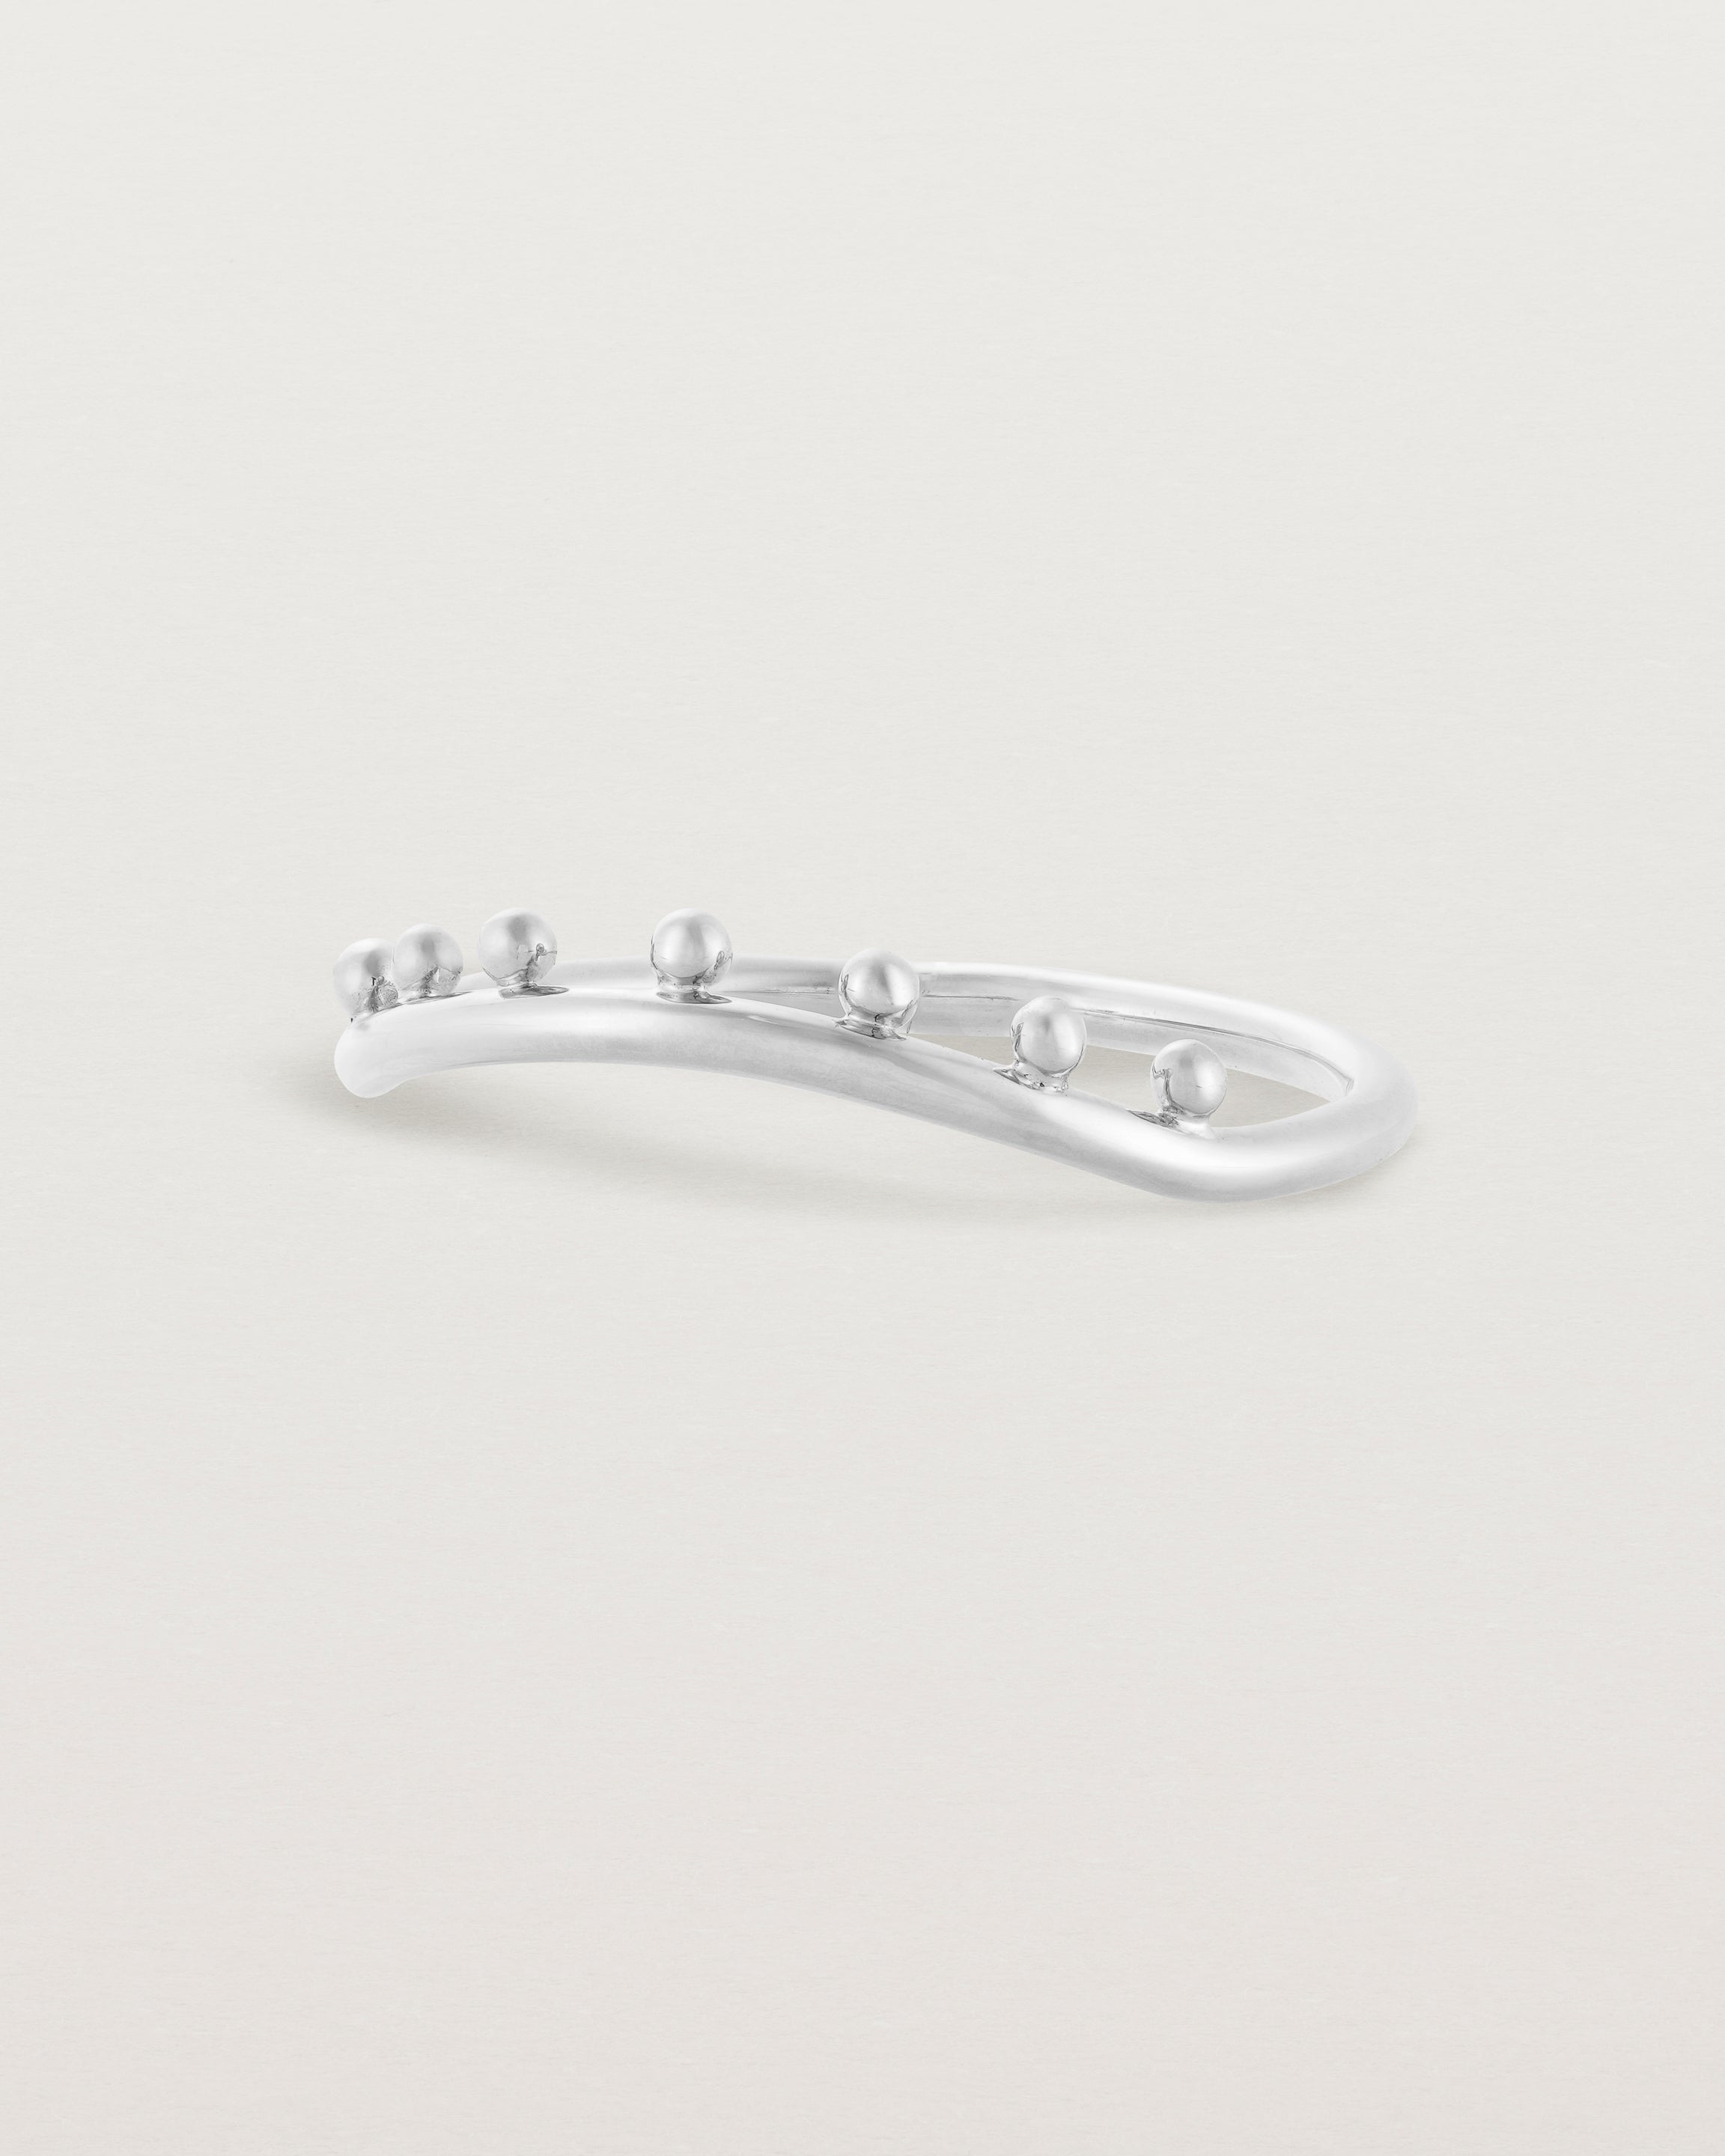 The side view of a gentle arc ring featuring dot detailing along the top of the arc, crafted in white gold.